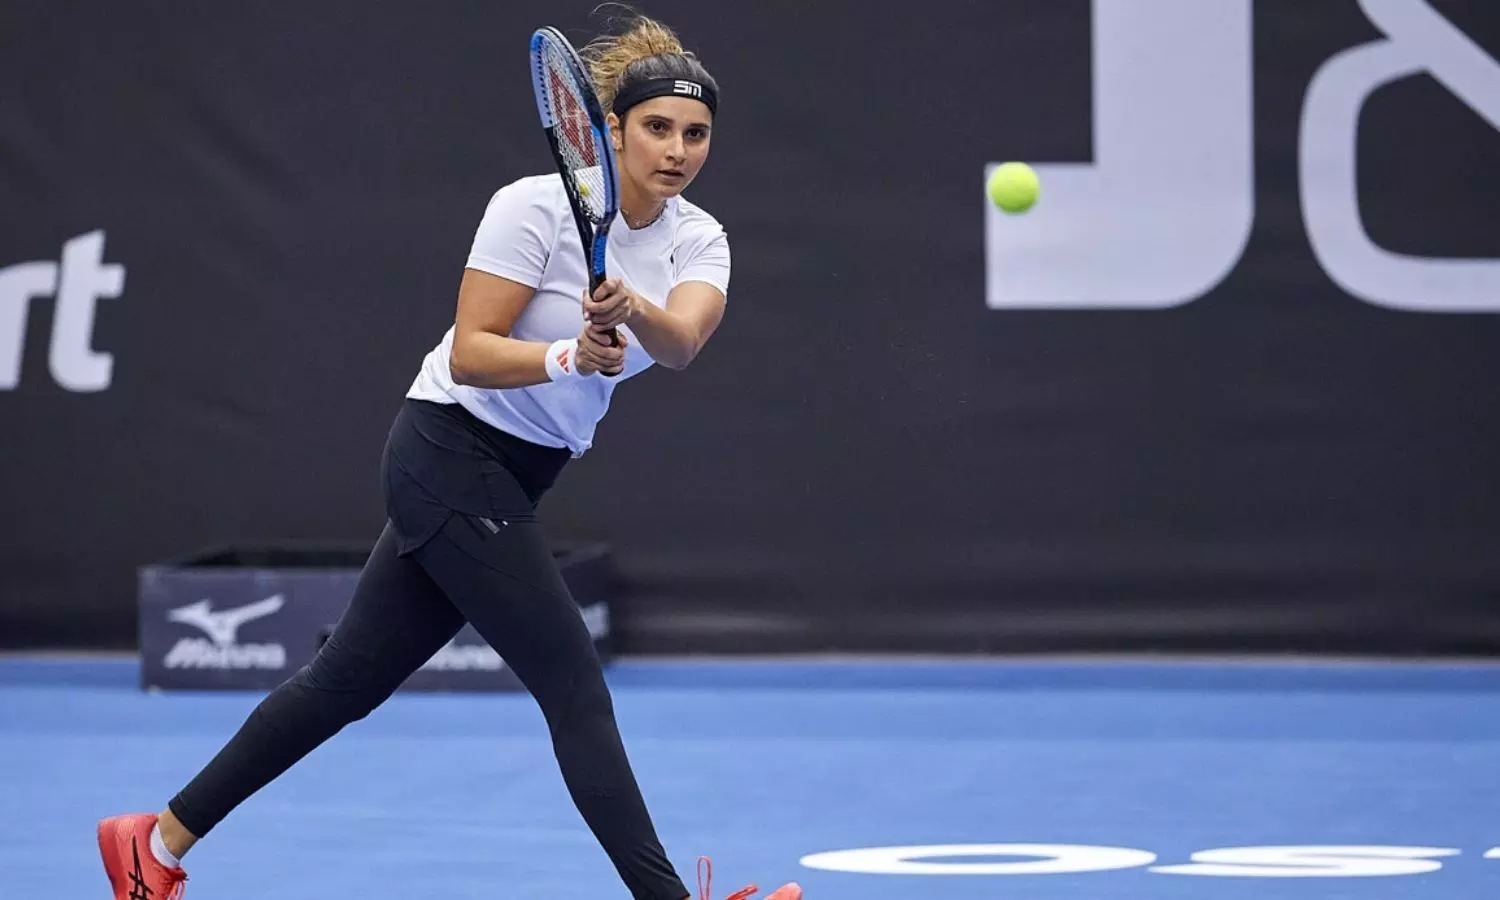 Indian Tennis Player Sania Mizra Hd Xxx Videos - I've decided this will be my final season' - Sania Mirza after Australian  Open loss